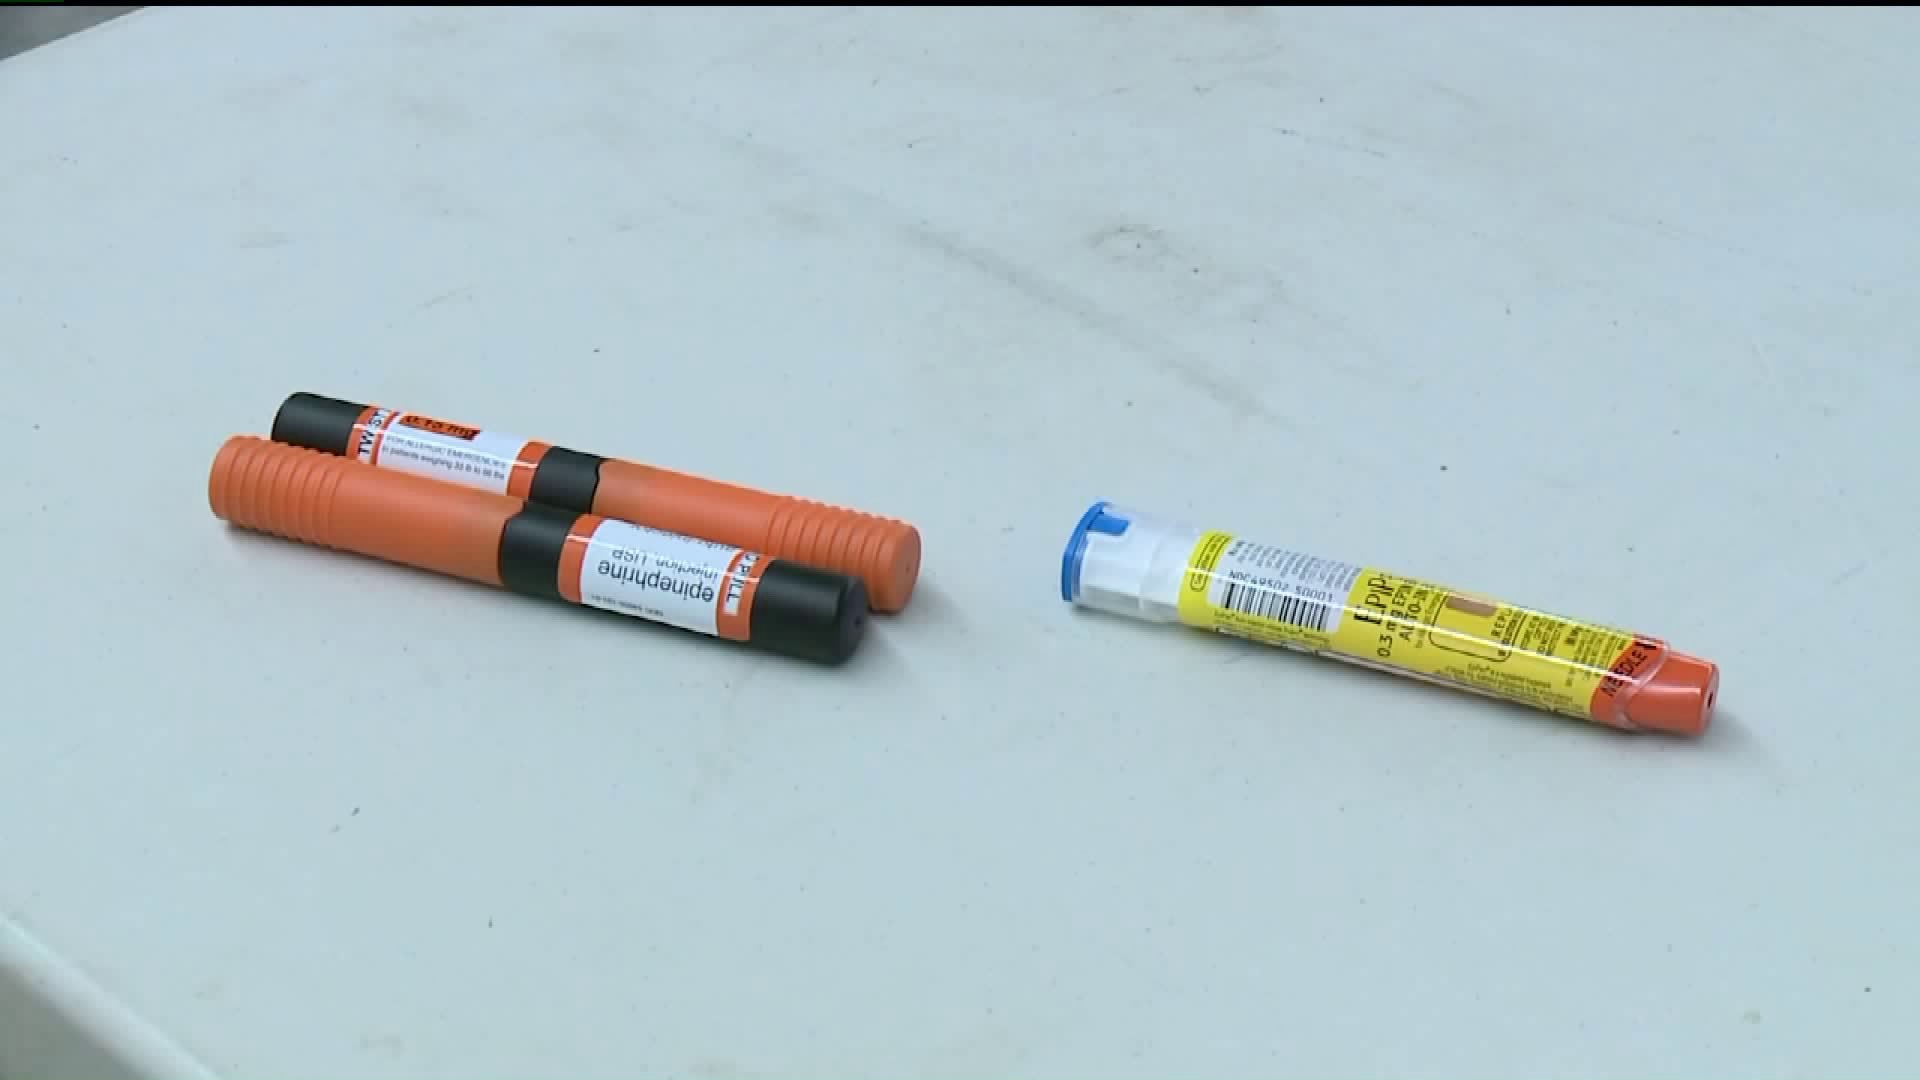 New Law To Equip School Bus Drivers with EpiPens